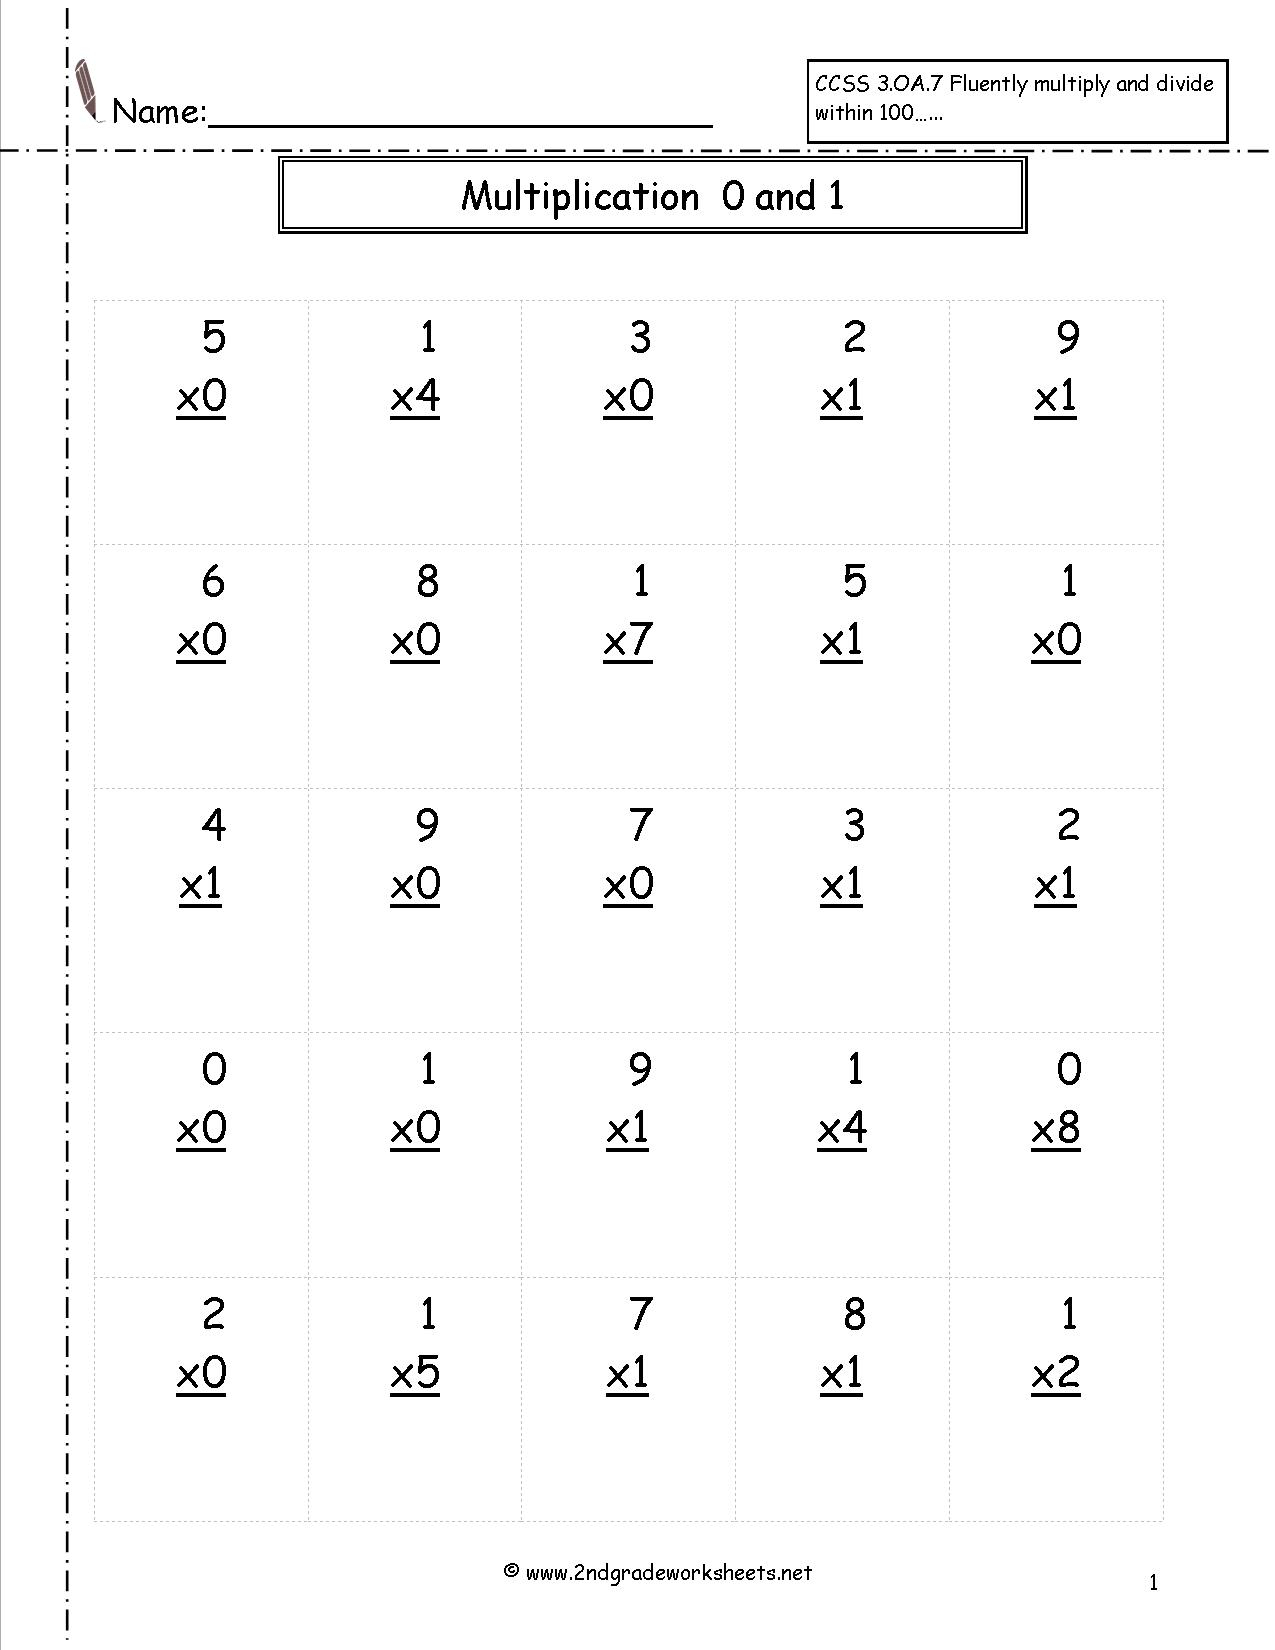 Multiplication Worksheets And Printouts pertaining to Printable Multiplication Worksheets 2S